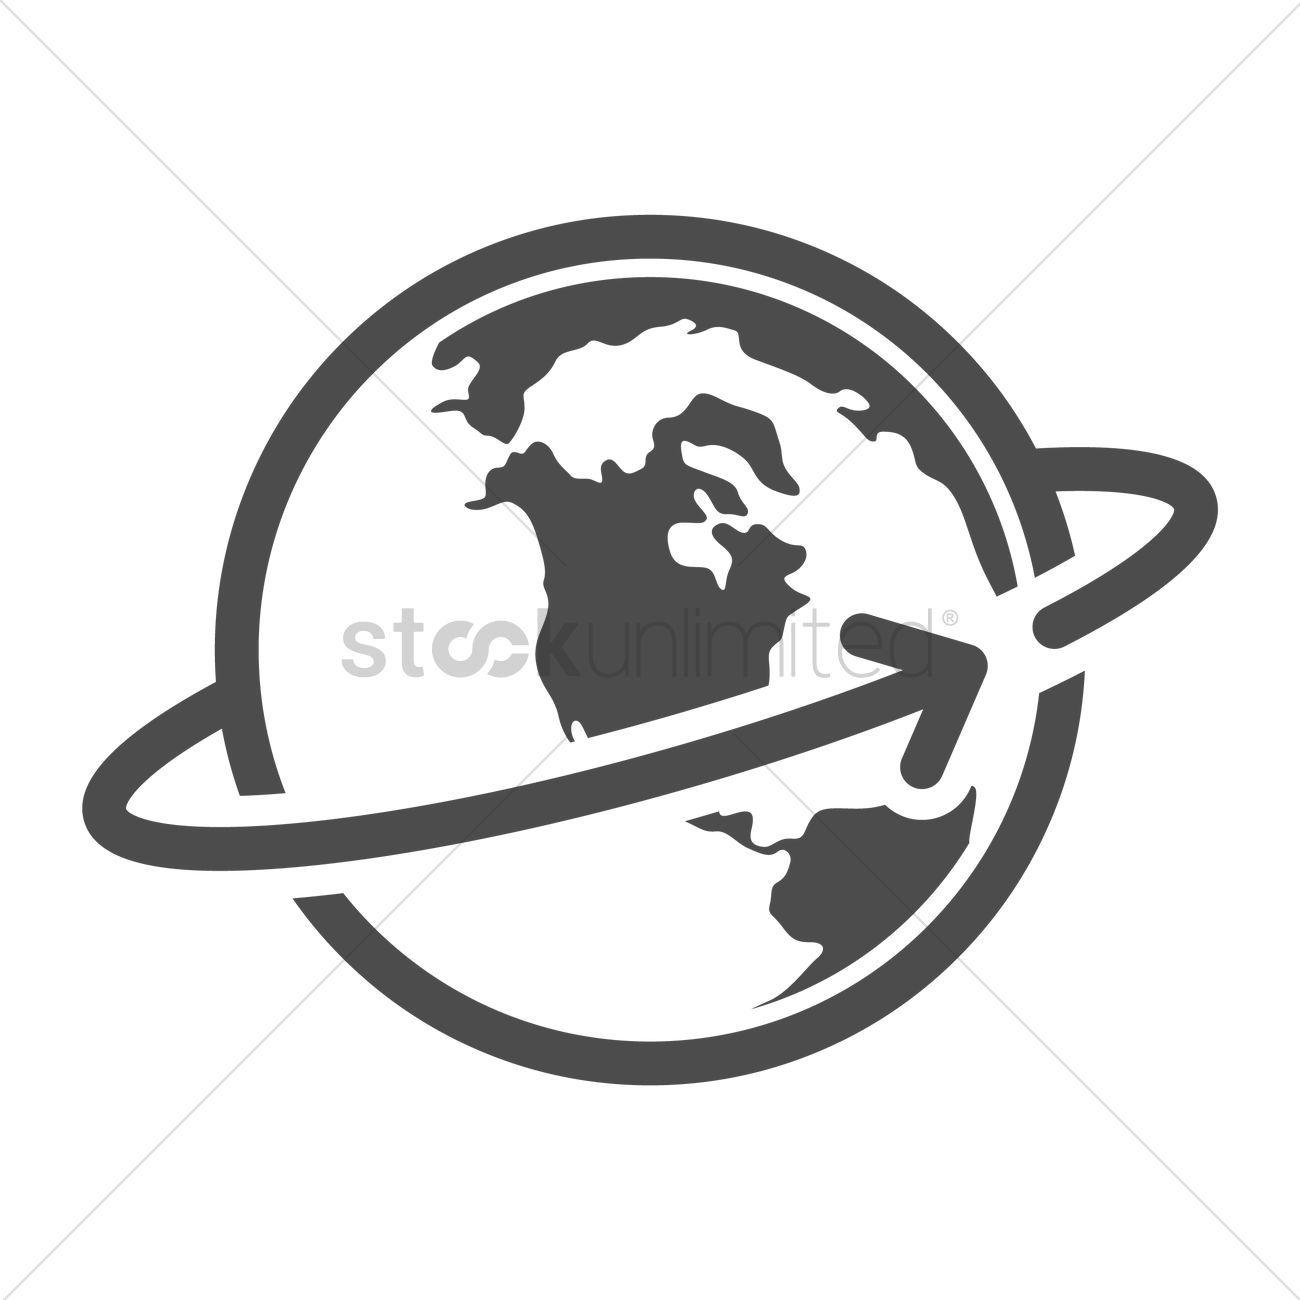 Globe with Arrow Logo - Globe with spinning arrow Vector Image - 1937535 | StockUnlimited